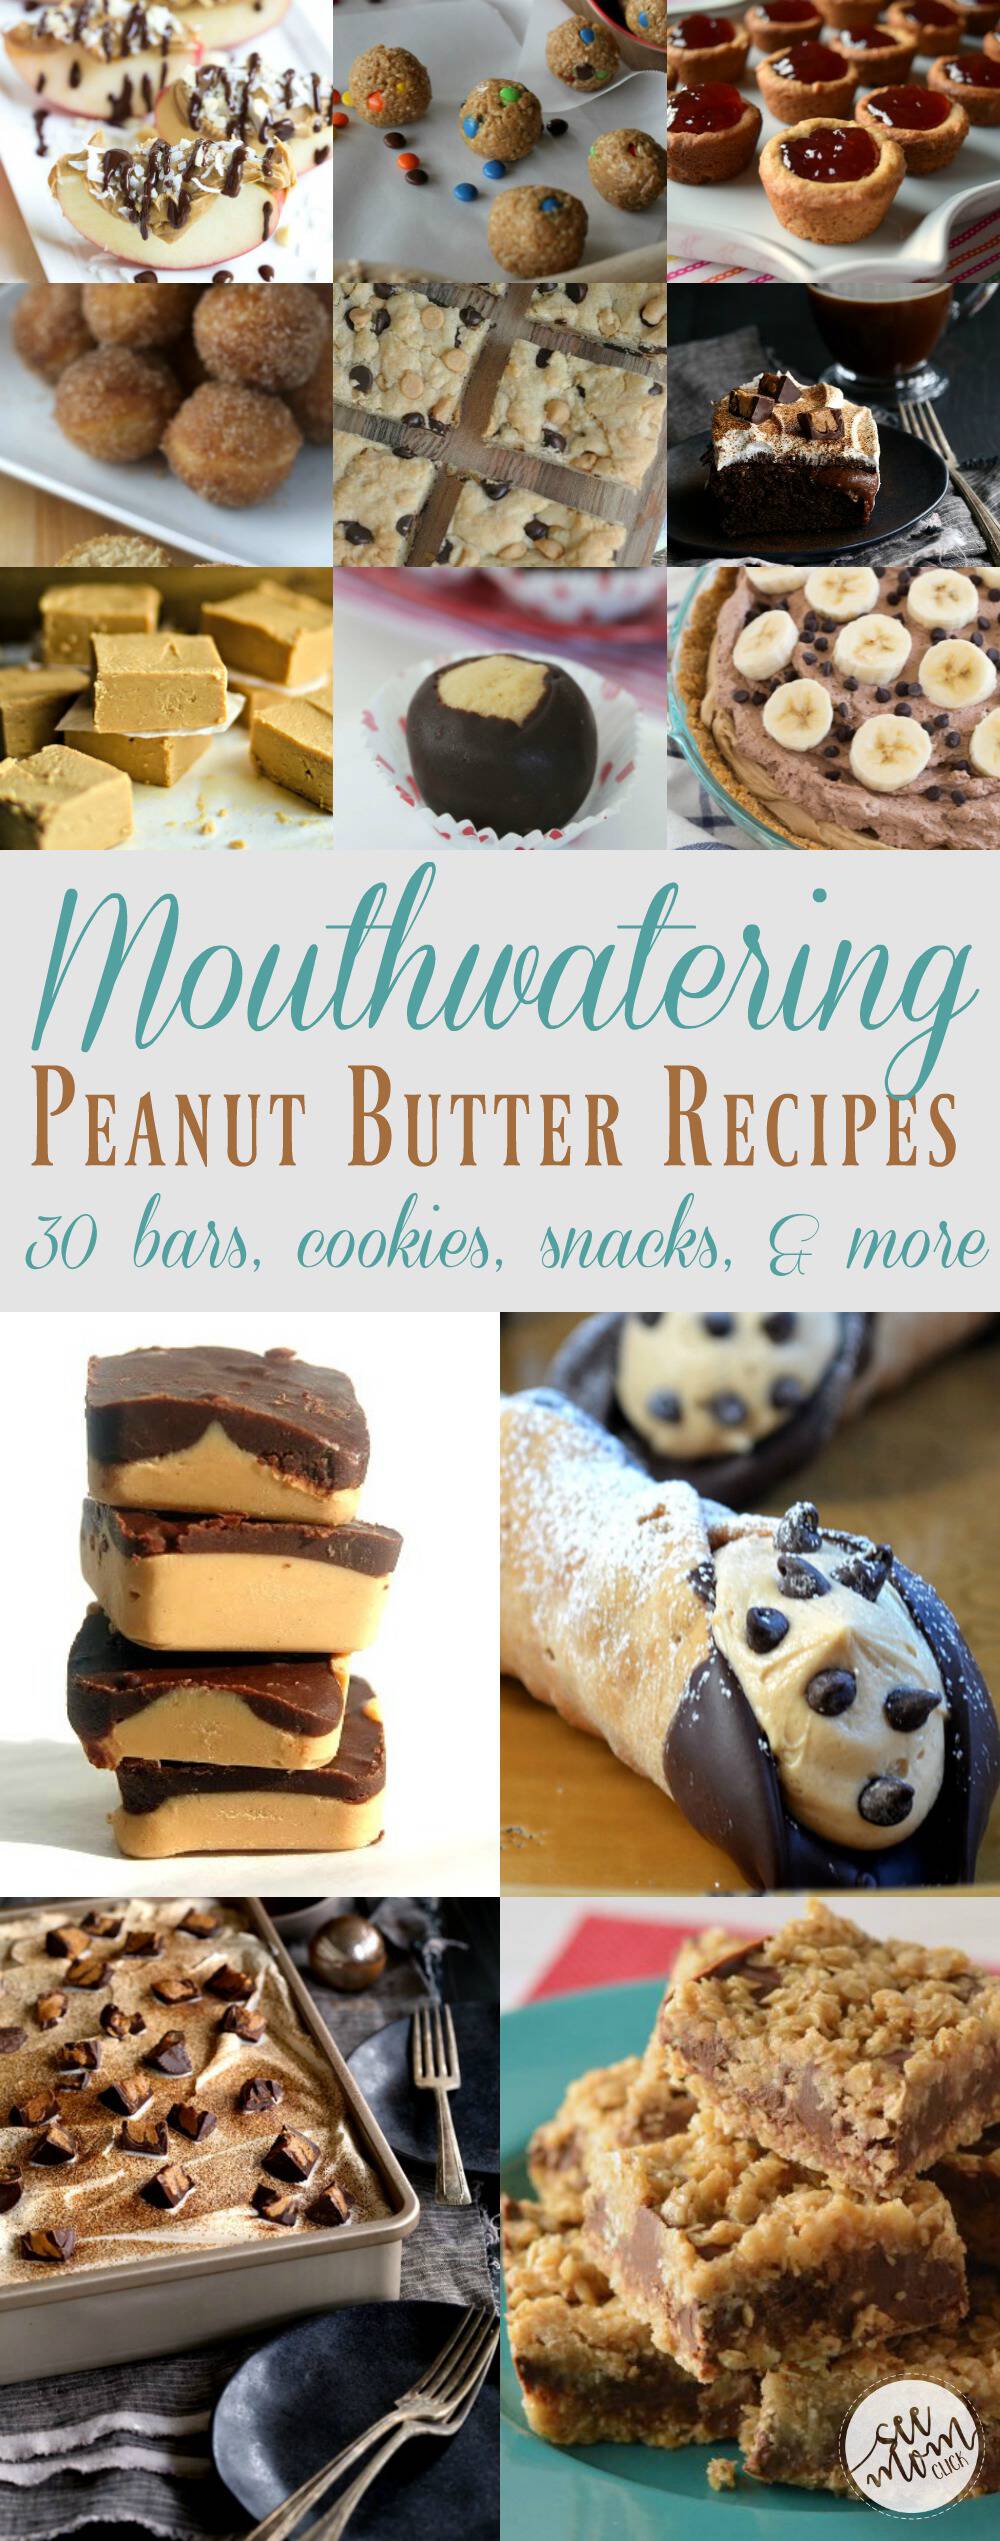 Peanut butter cookies, and pies, and snack balls, oh my! If you love peanut butter desserts you're going to want to try some of the goodies on this round up of mouthwatering peanut butter recipes!